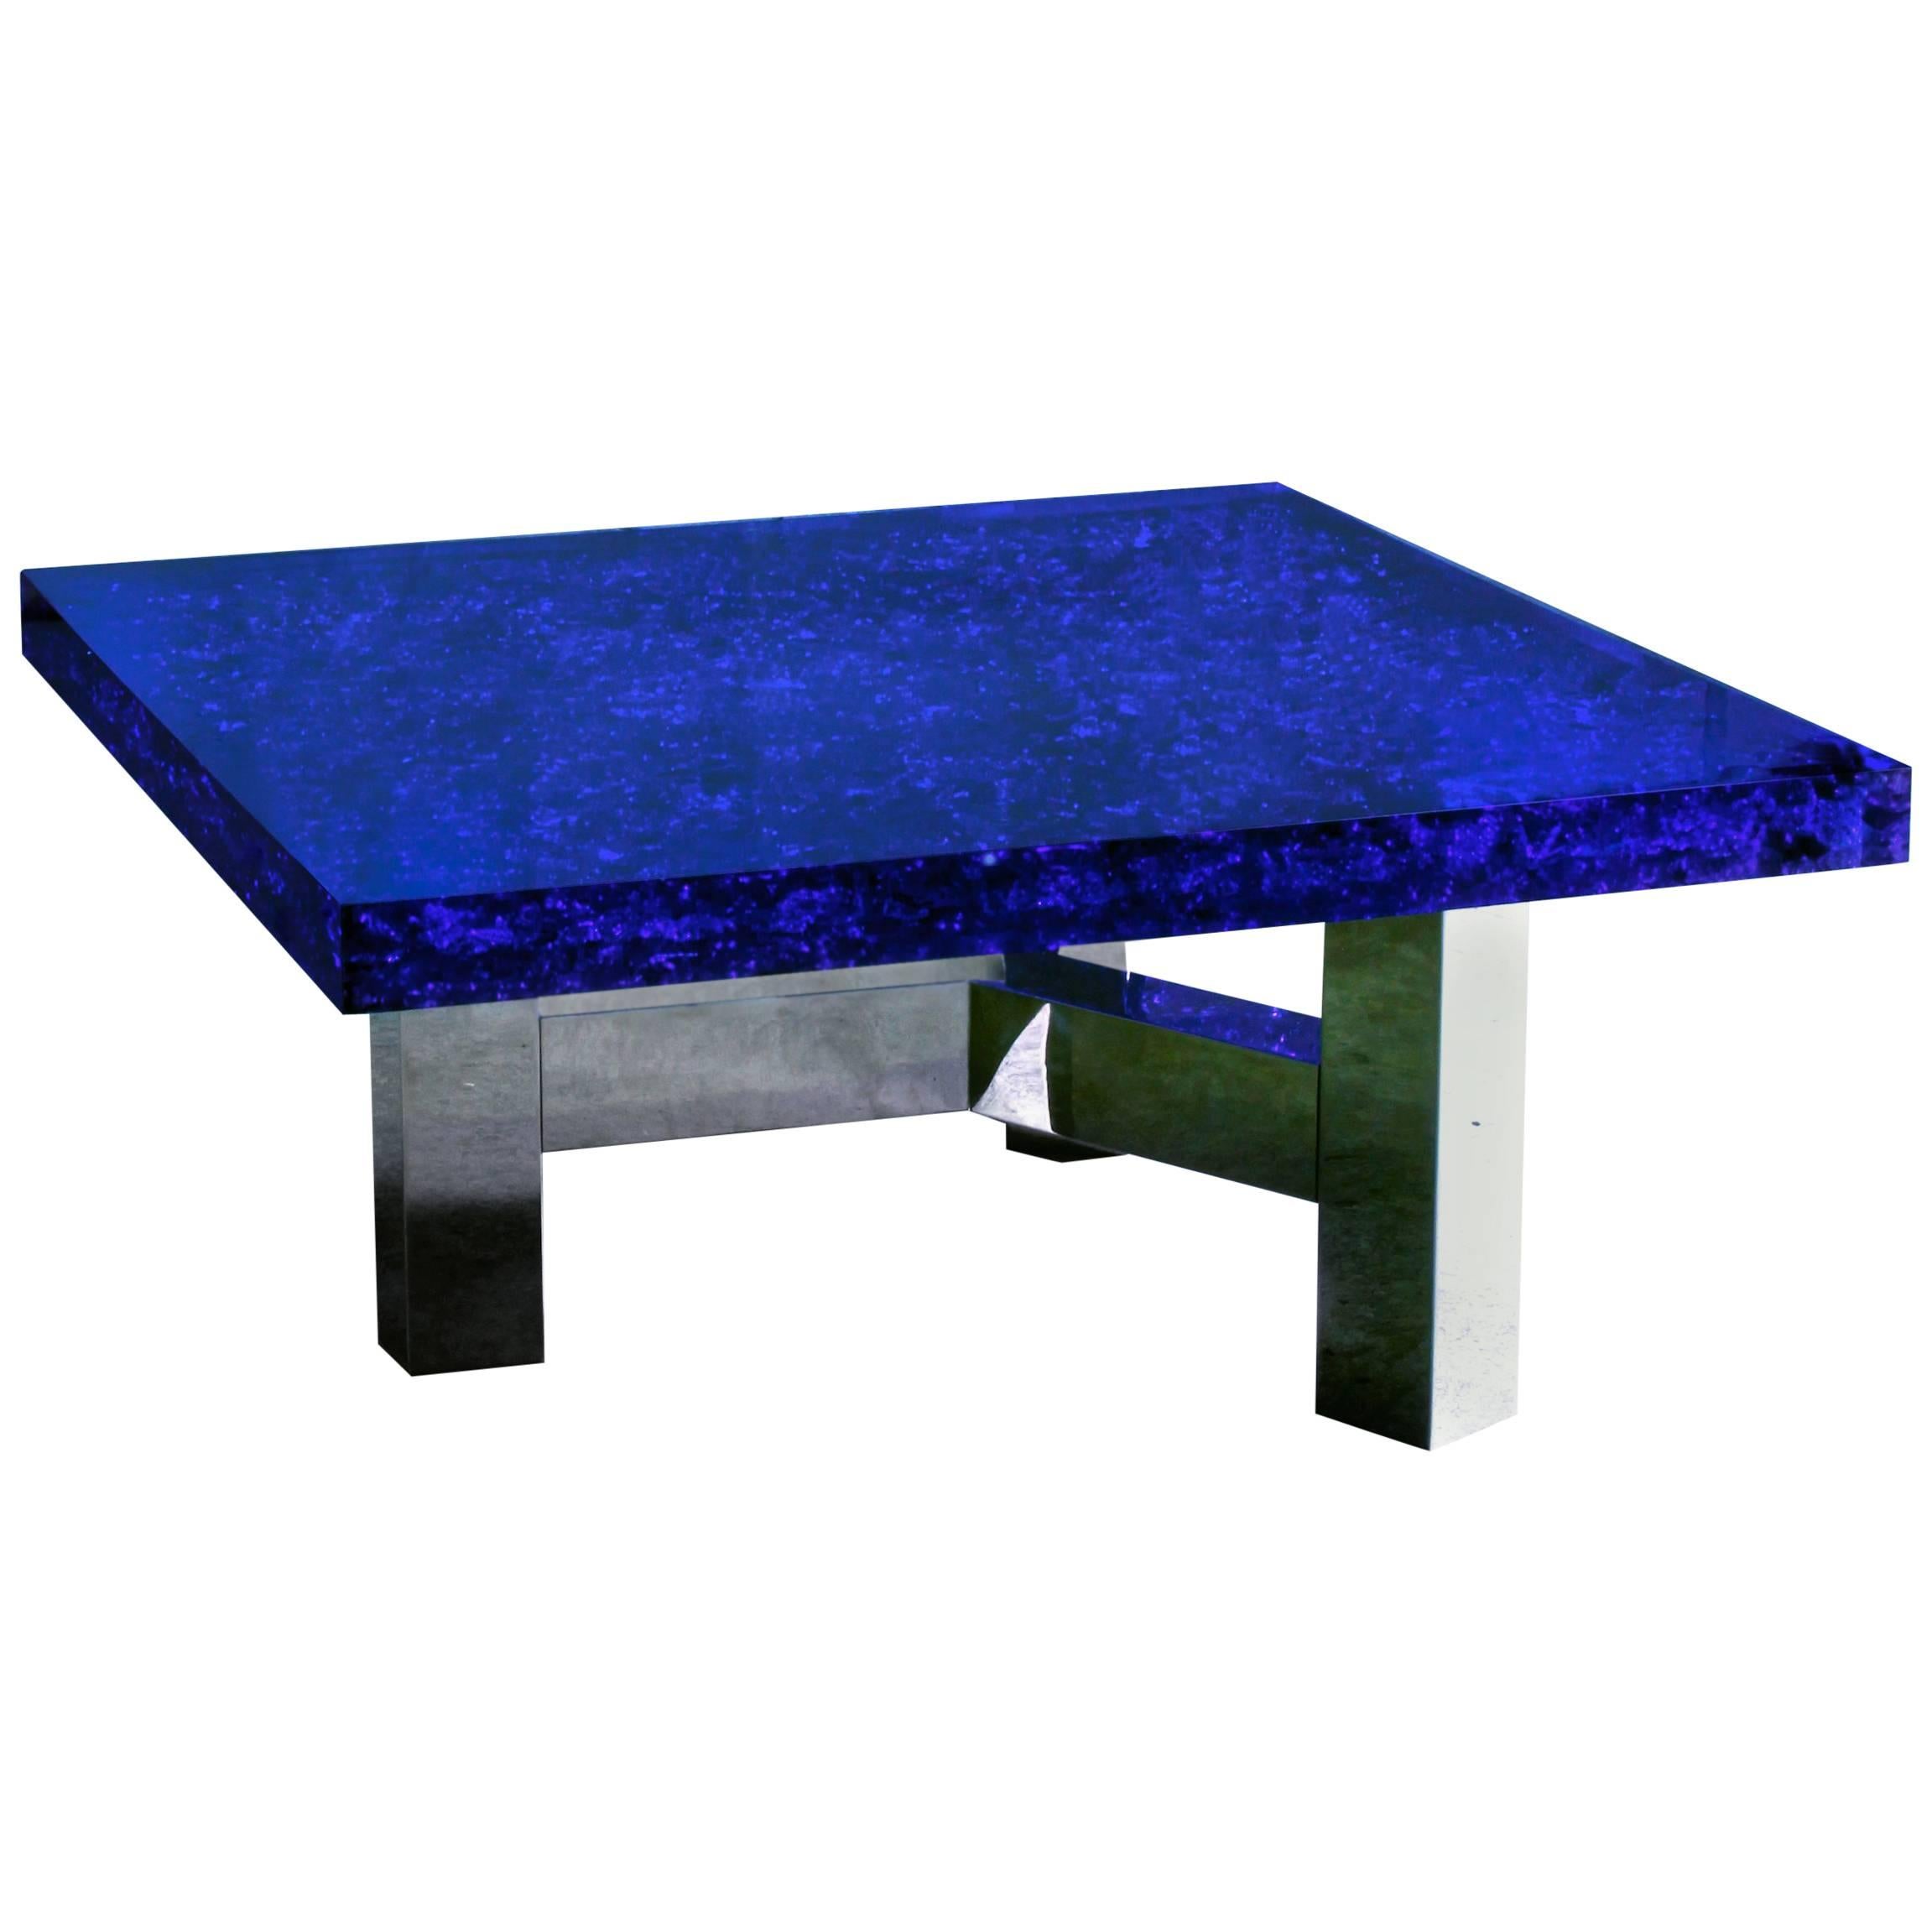 Blue Lucite and Murano Glass Coffee Table Nickel-Plated Brass Base "Riflessioni"